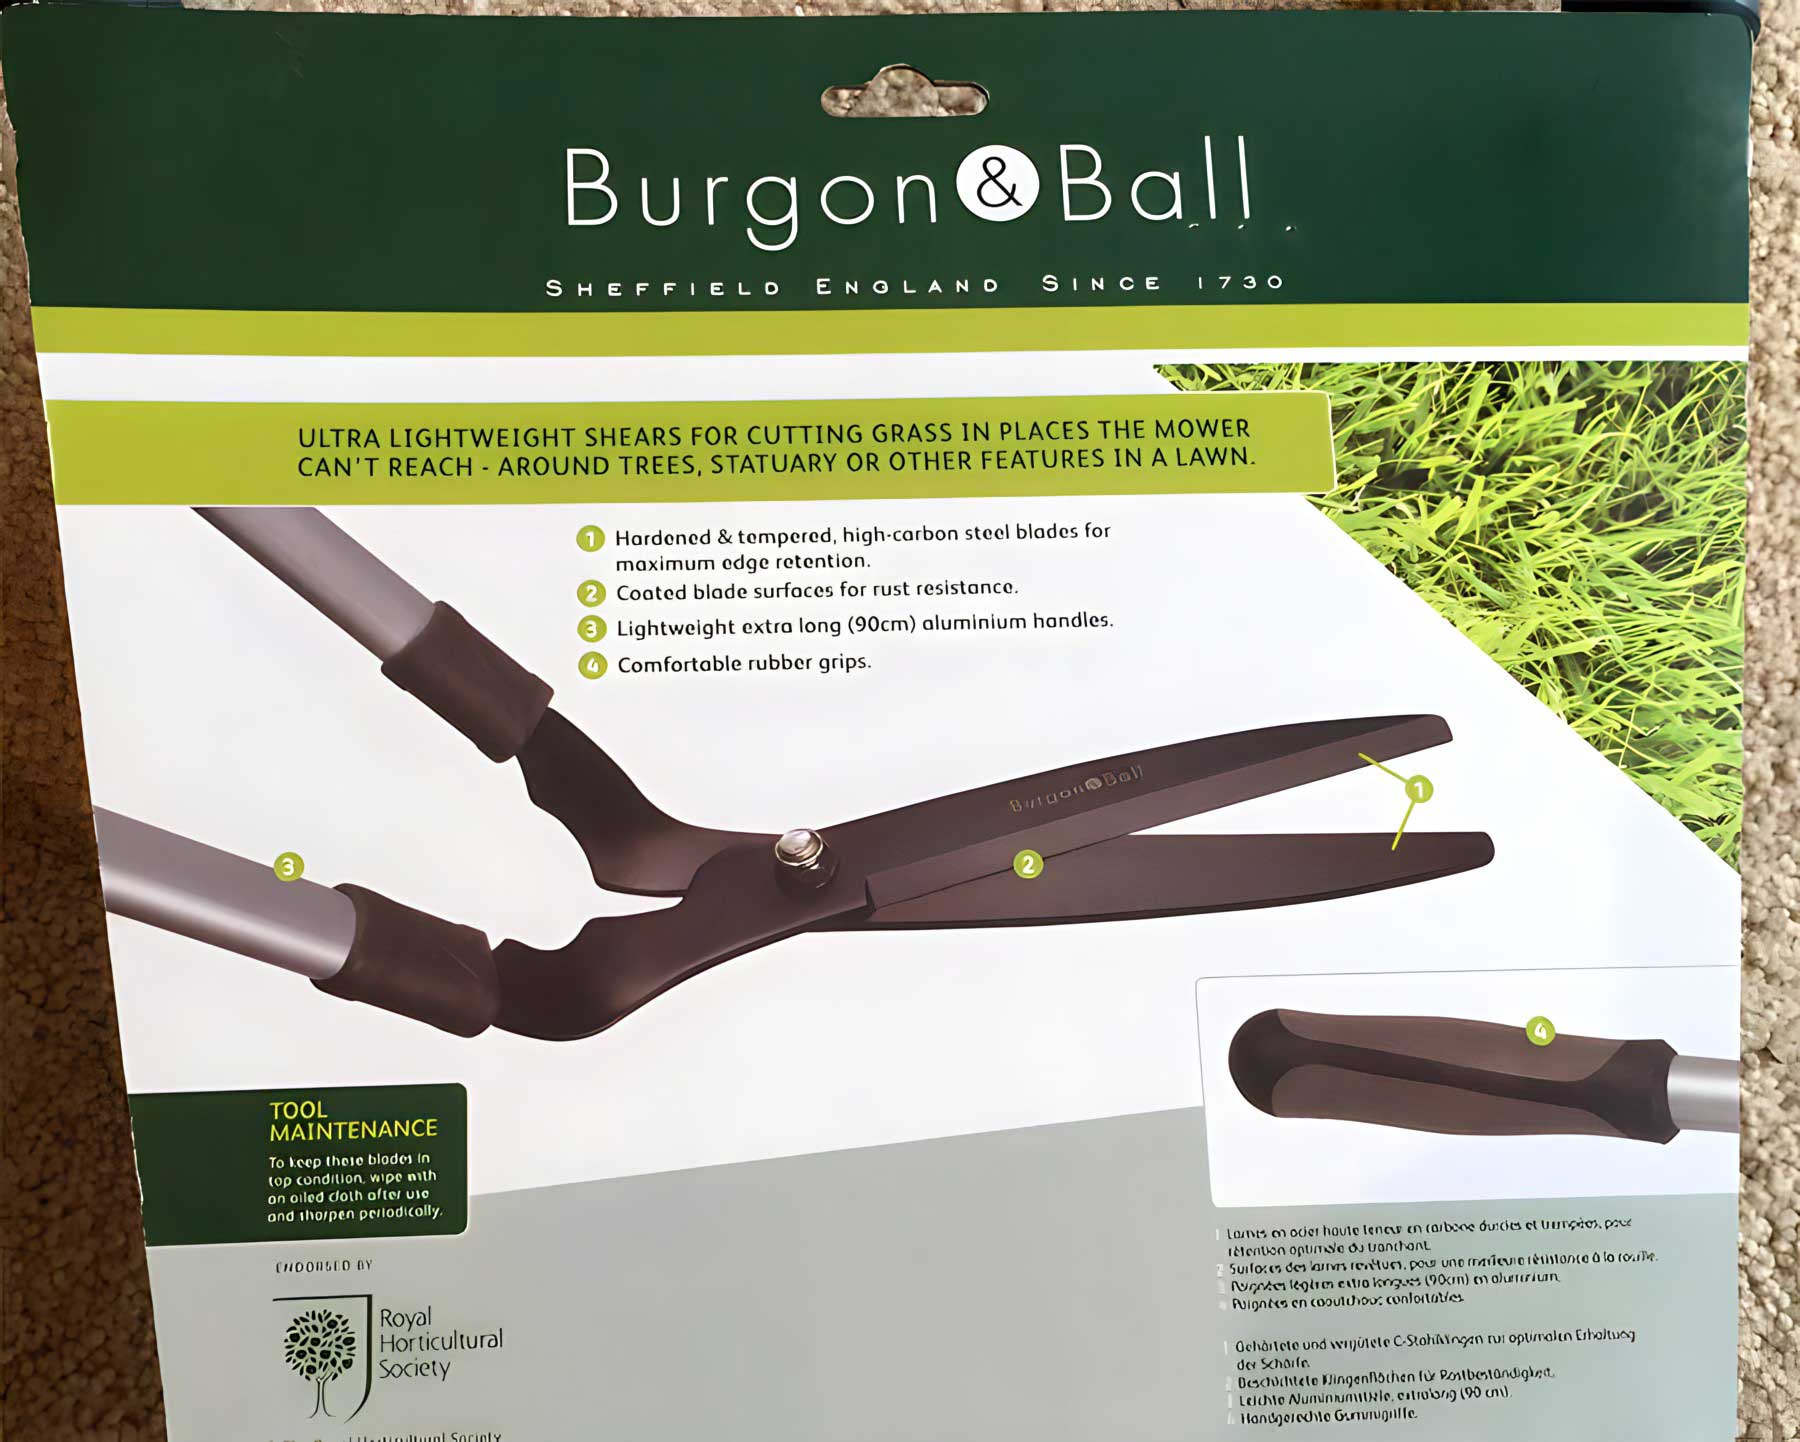 Long Handled Lawn Shears by Burgon and Ball of UK.